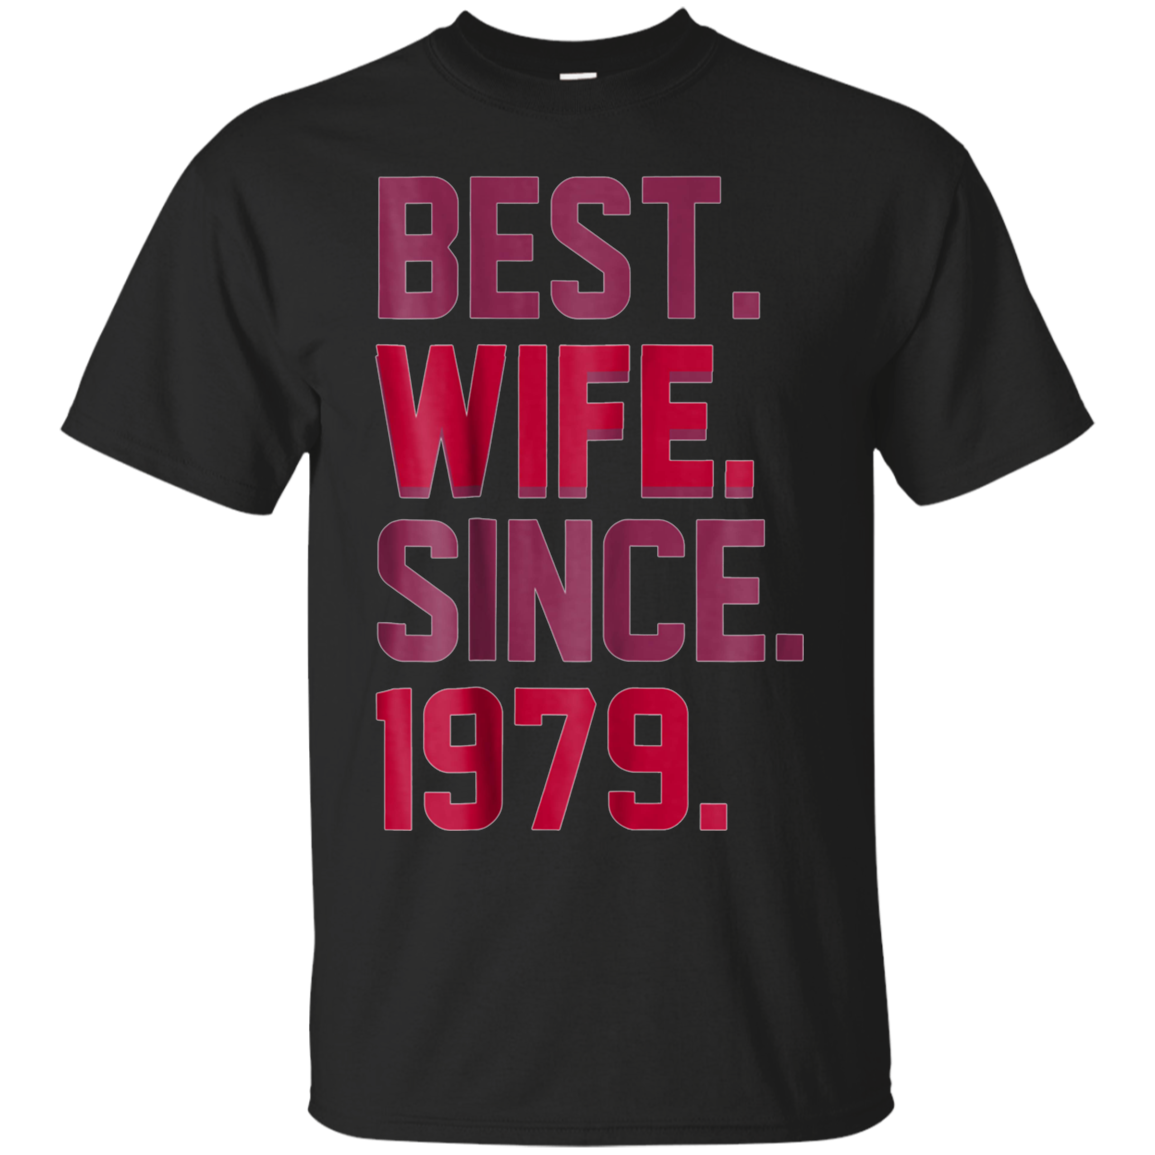 Best Wife Since 1979-39th Wedding Anniversary Gift T-shirt